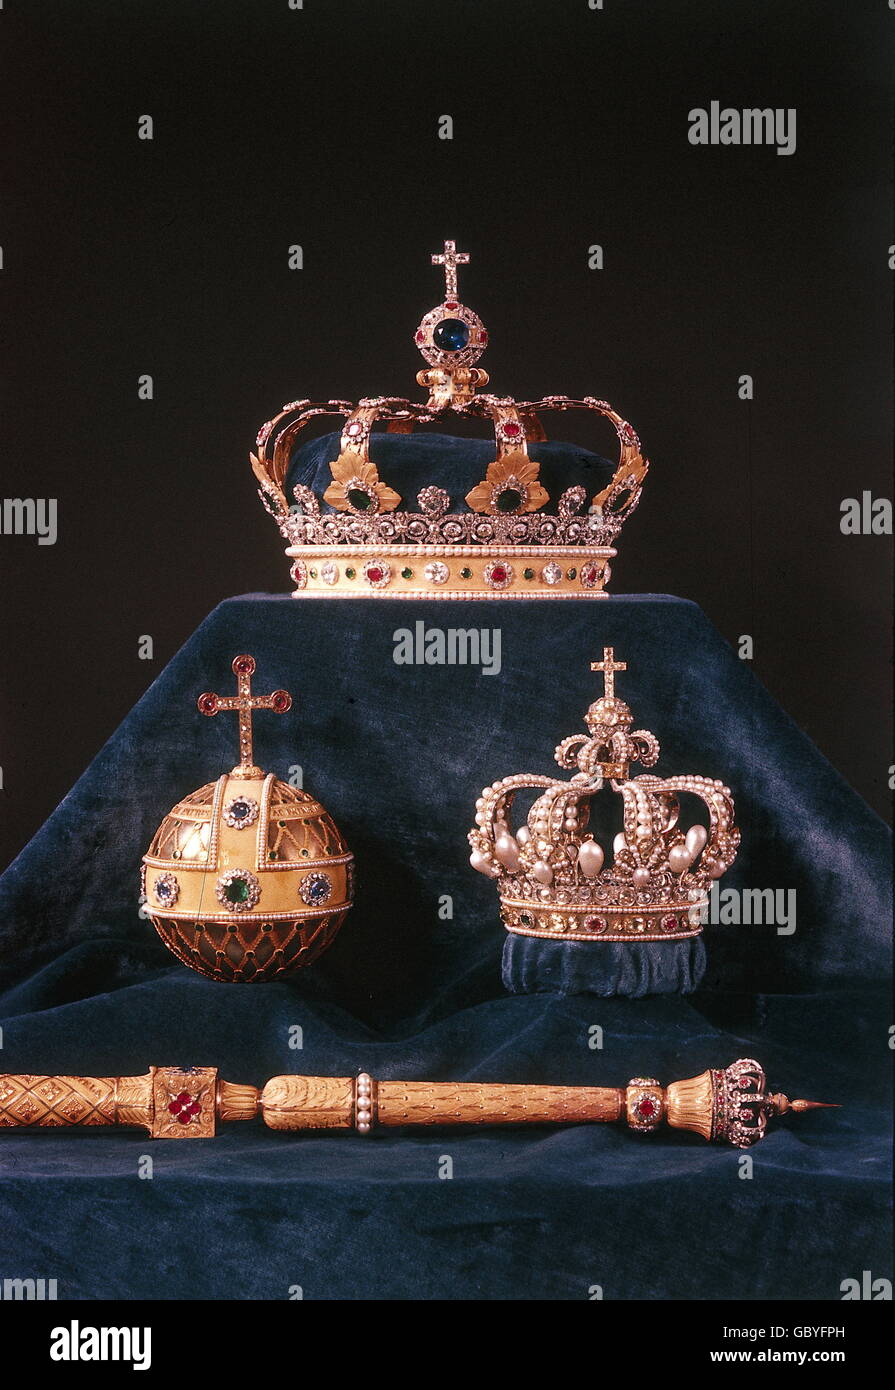 jewellery, crown jewels, Bavaria, royal crown and globus cruciger, sceptre, made by Martin-Guillaume Biennais, Paris, 1806, Additional-Rights-Clearences-Not Available Stock Photo